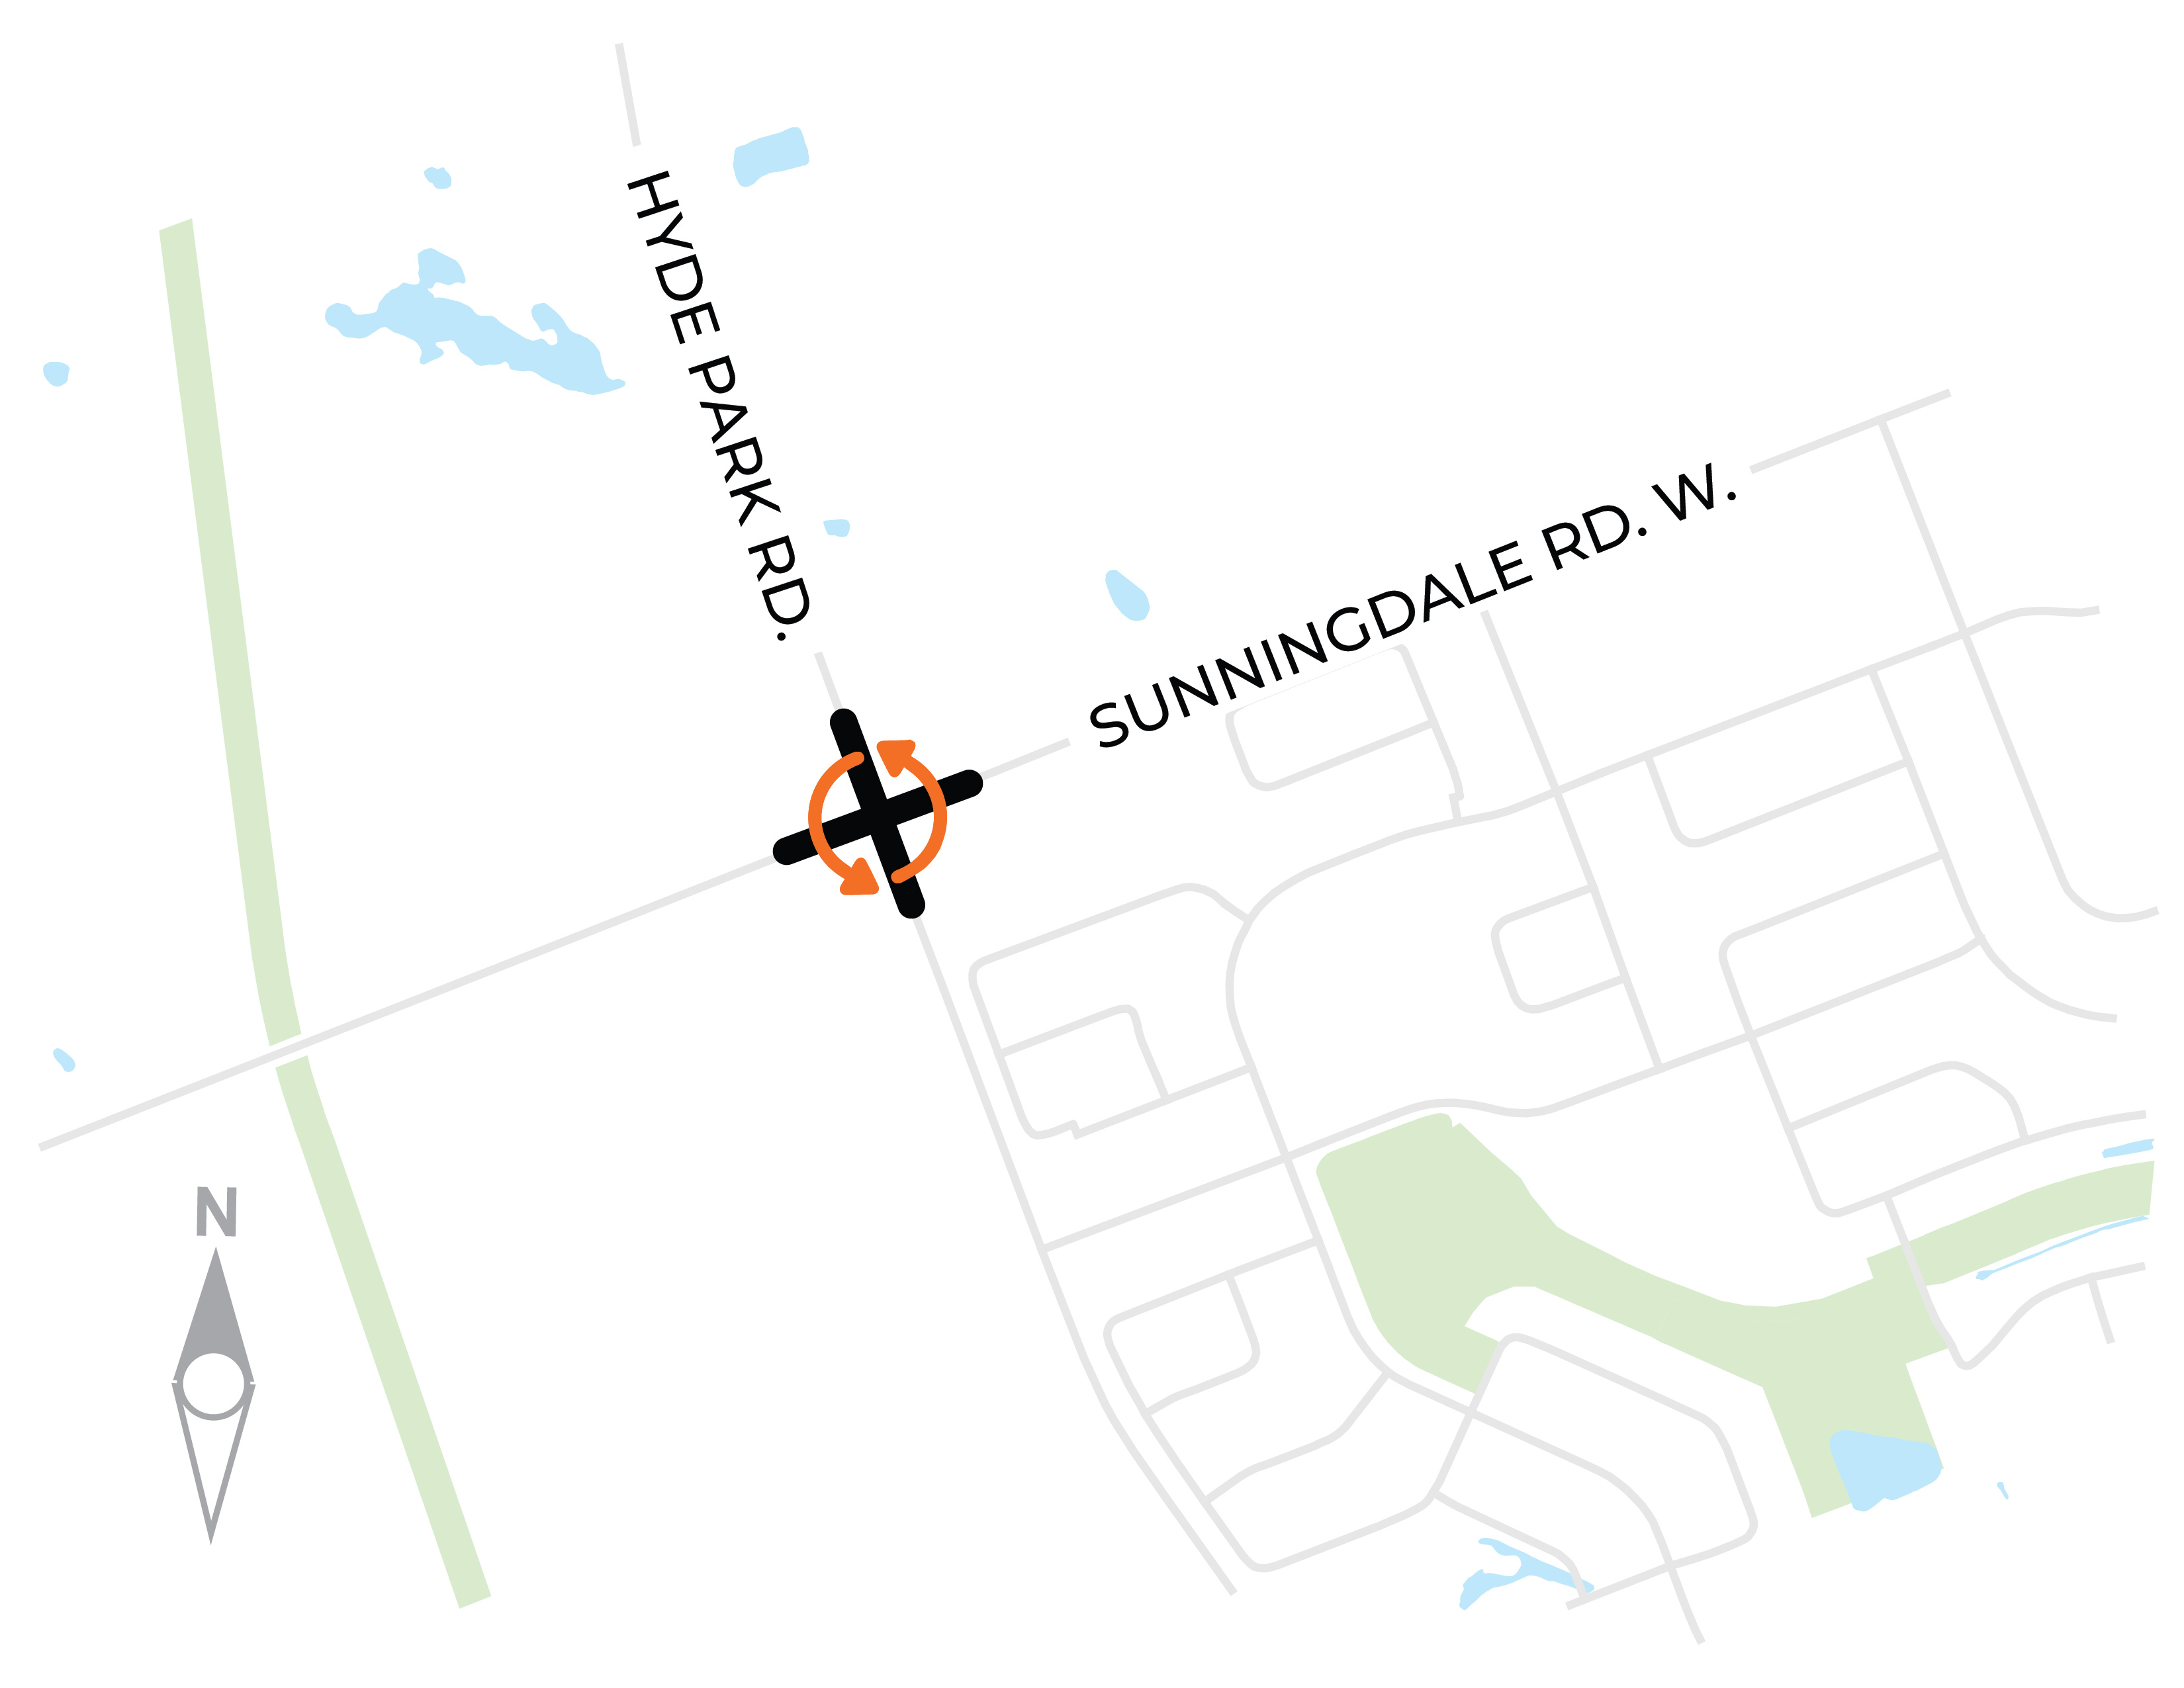 The construction limits. The City will be reconstructing Hyde Park Road and Sunningdale Road West within 200 meters of the intersection. For more information, please contact John Bos at jbos@london.ca or by calling 519-661-2489 ext. 7348